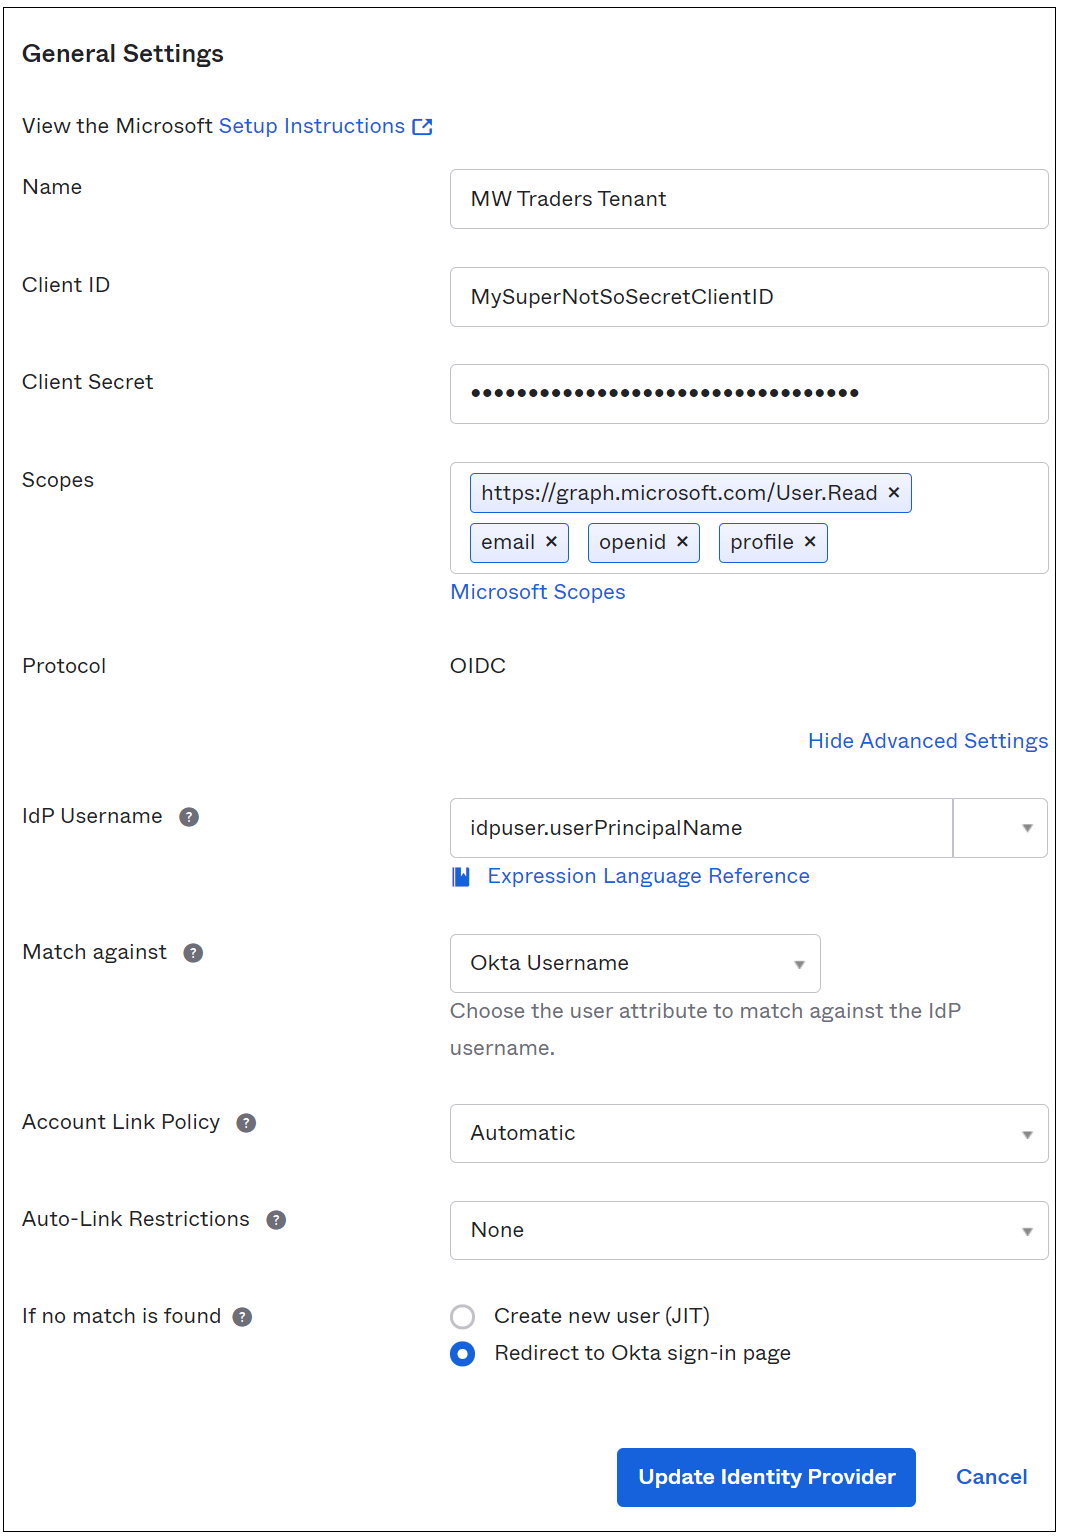 Screenshot of the General Settings page in the Okta admin portal. The option for redirecting to the Okta sign-in page is visible.